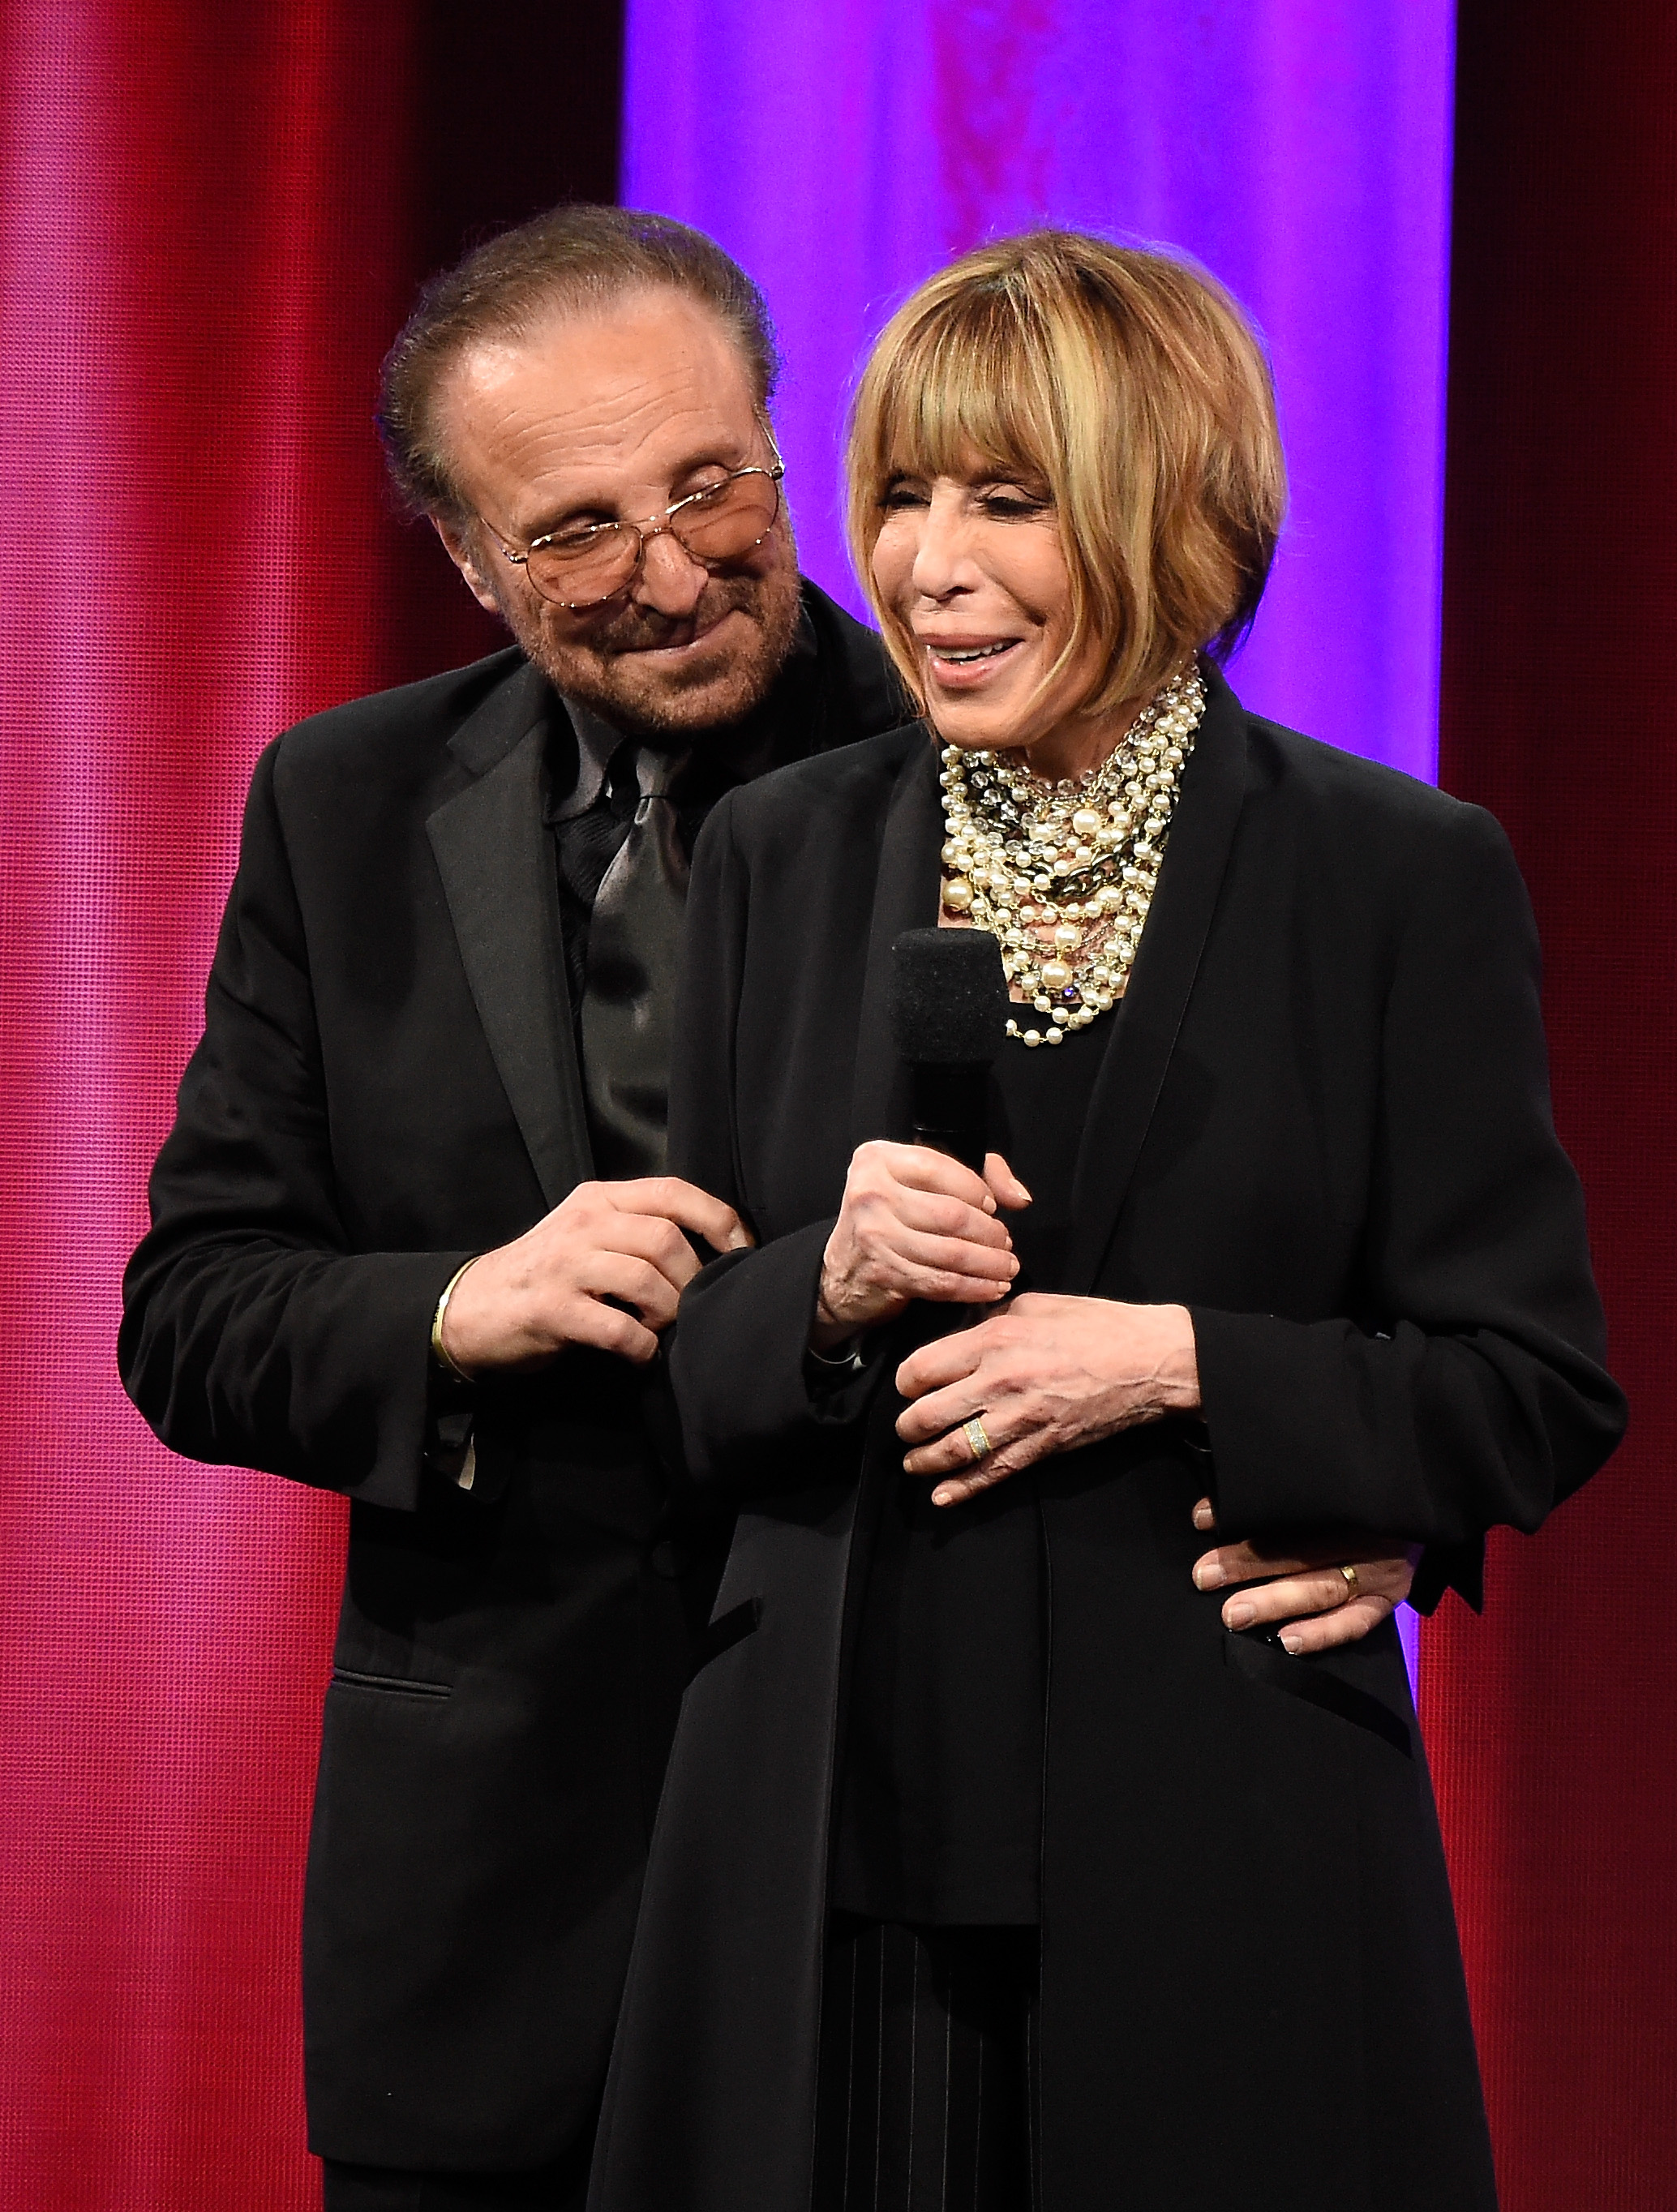 Barry Mann and Cynthia Weil are photographed as they accept the BMI Icon Award onstage at The 64th Annual BMI Pop Awards at the Beverly Wilshire Four Seasons Hotel on May 10, 2016, in Beverly Hills, California | Source: Getty Images